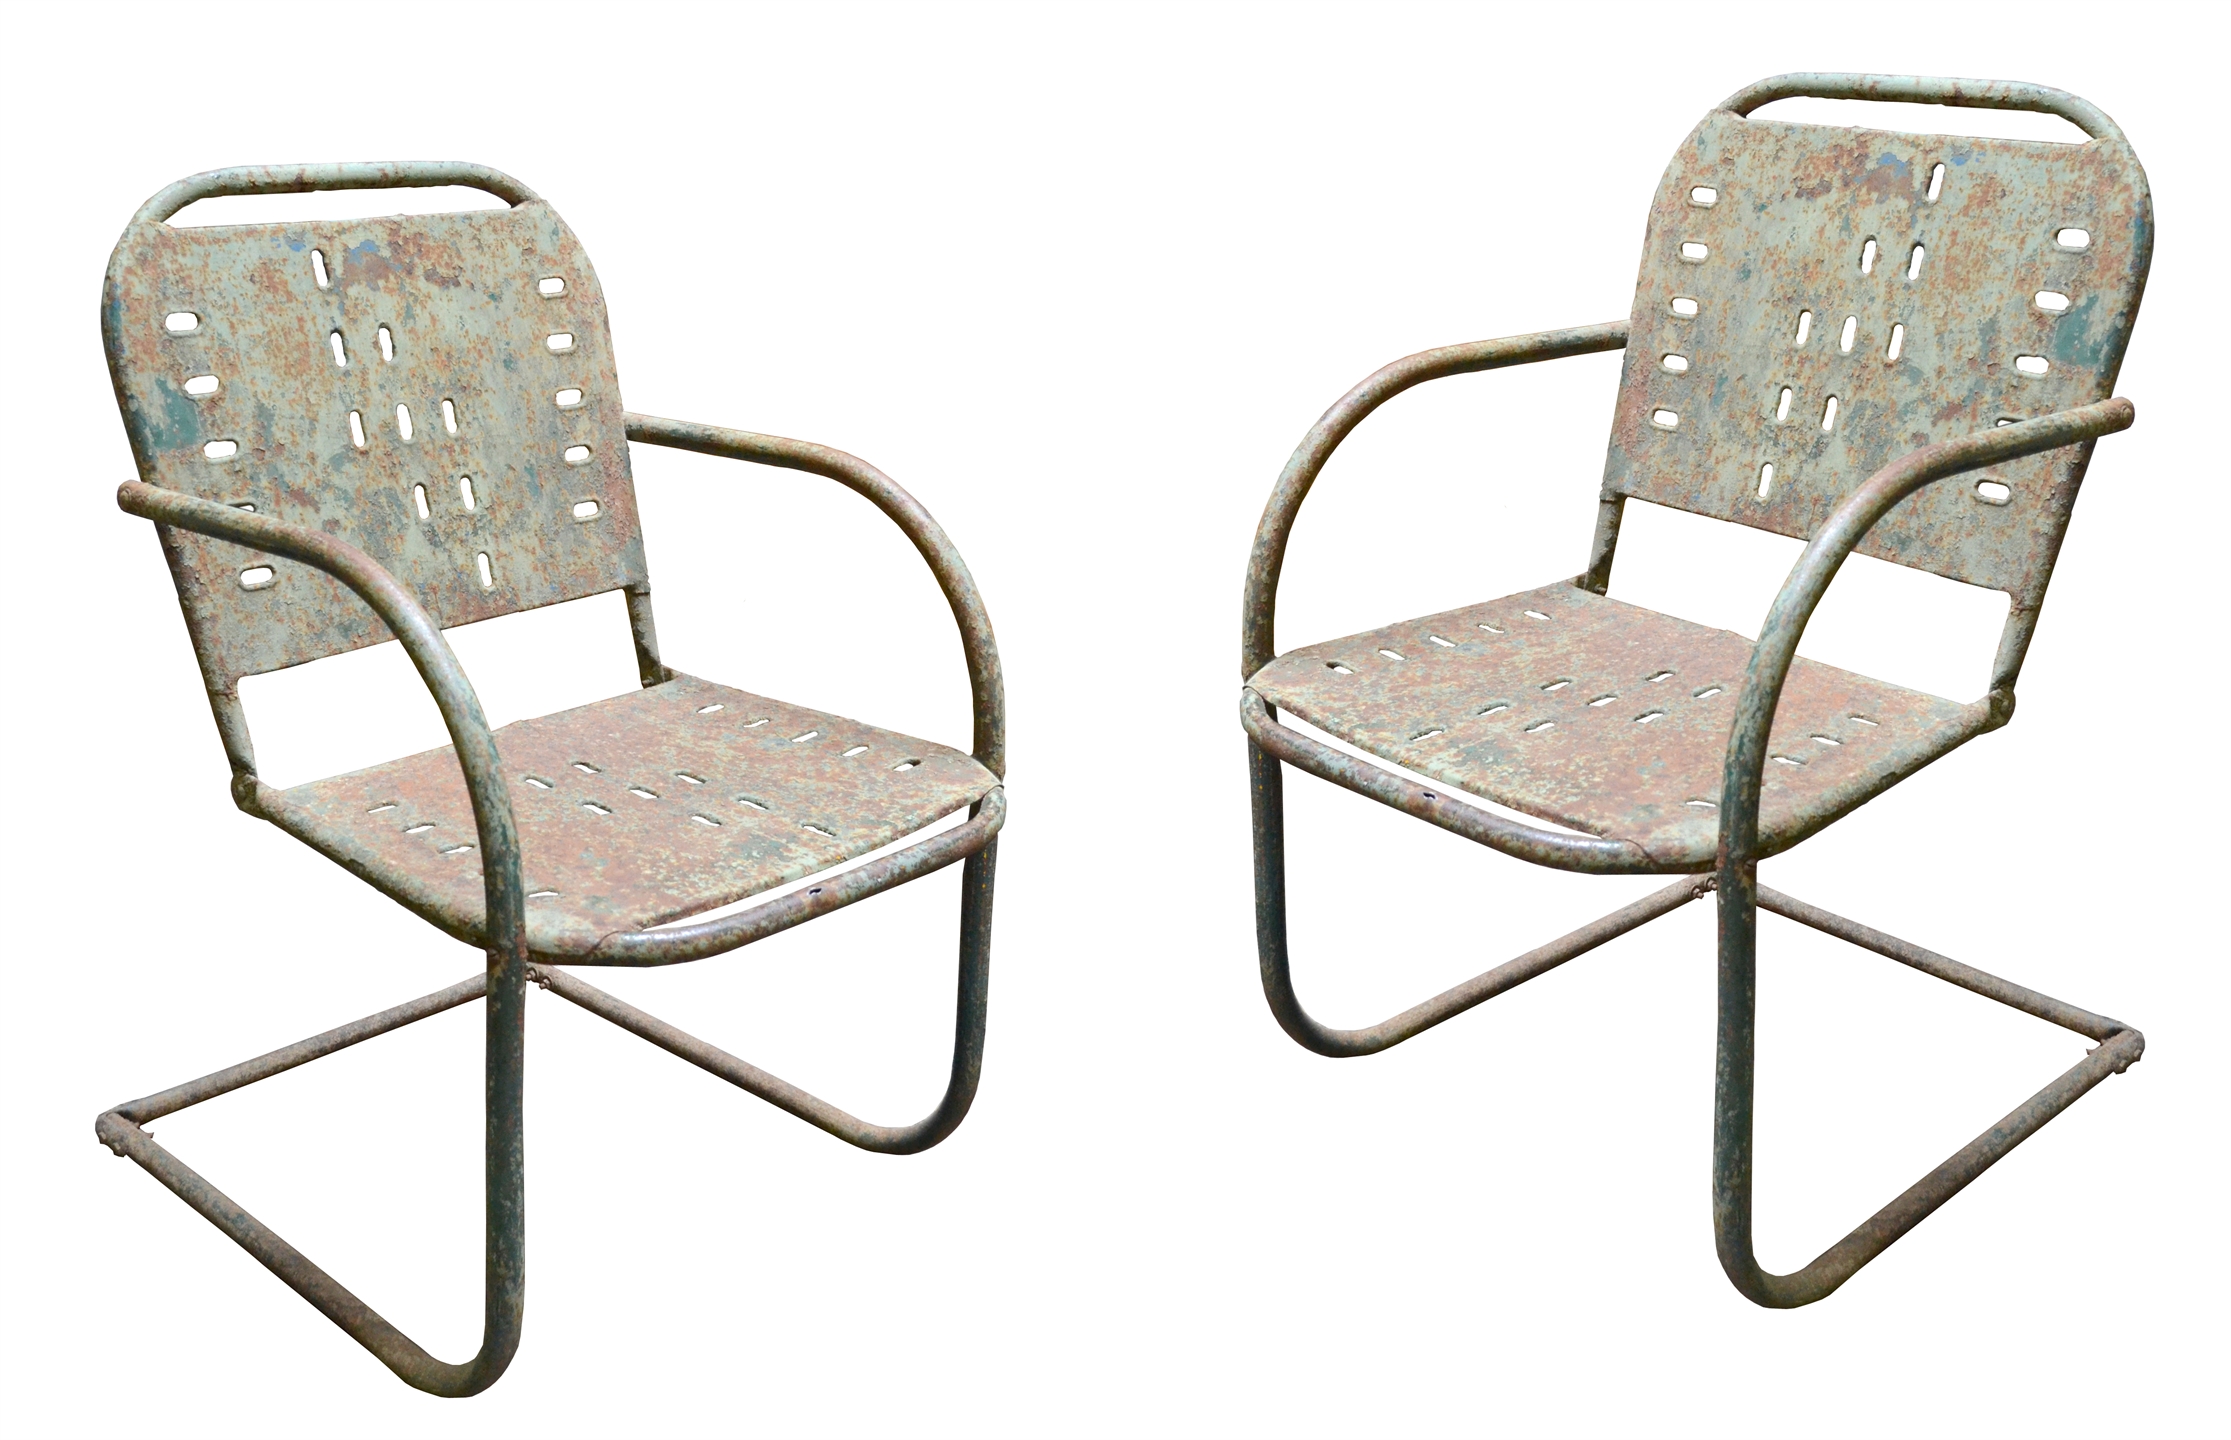 mb/3082 - Pair of Rustic Green Chairs